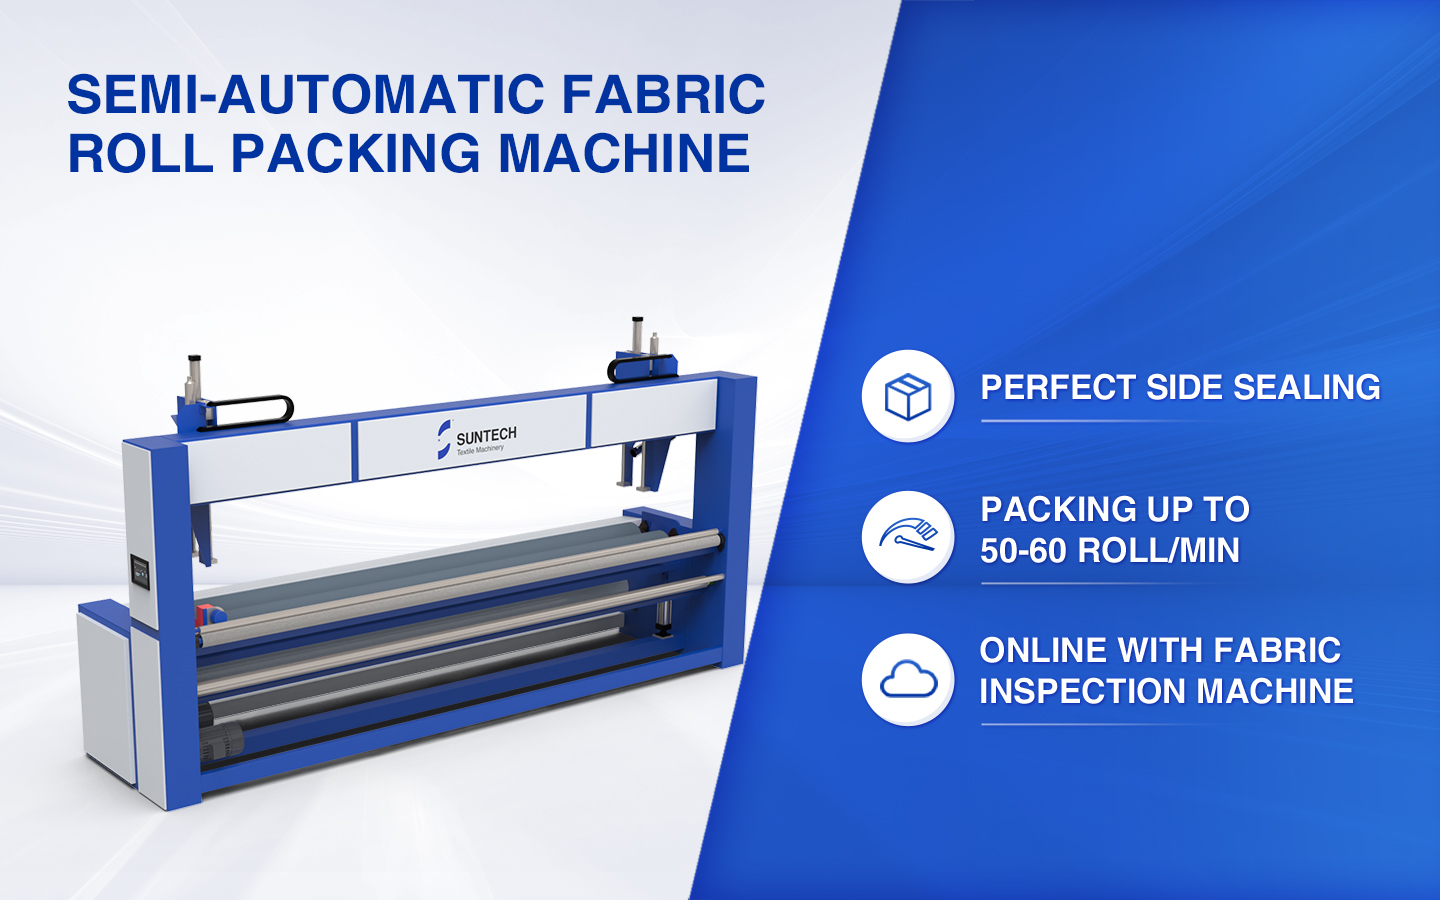 Semi-automatic Fabric Roll Packing Machine features